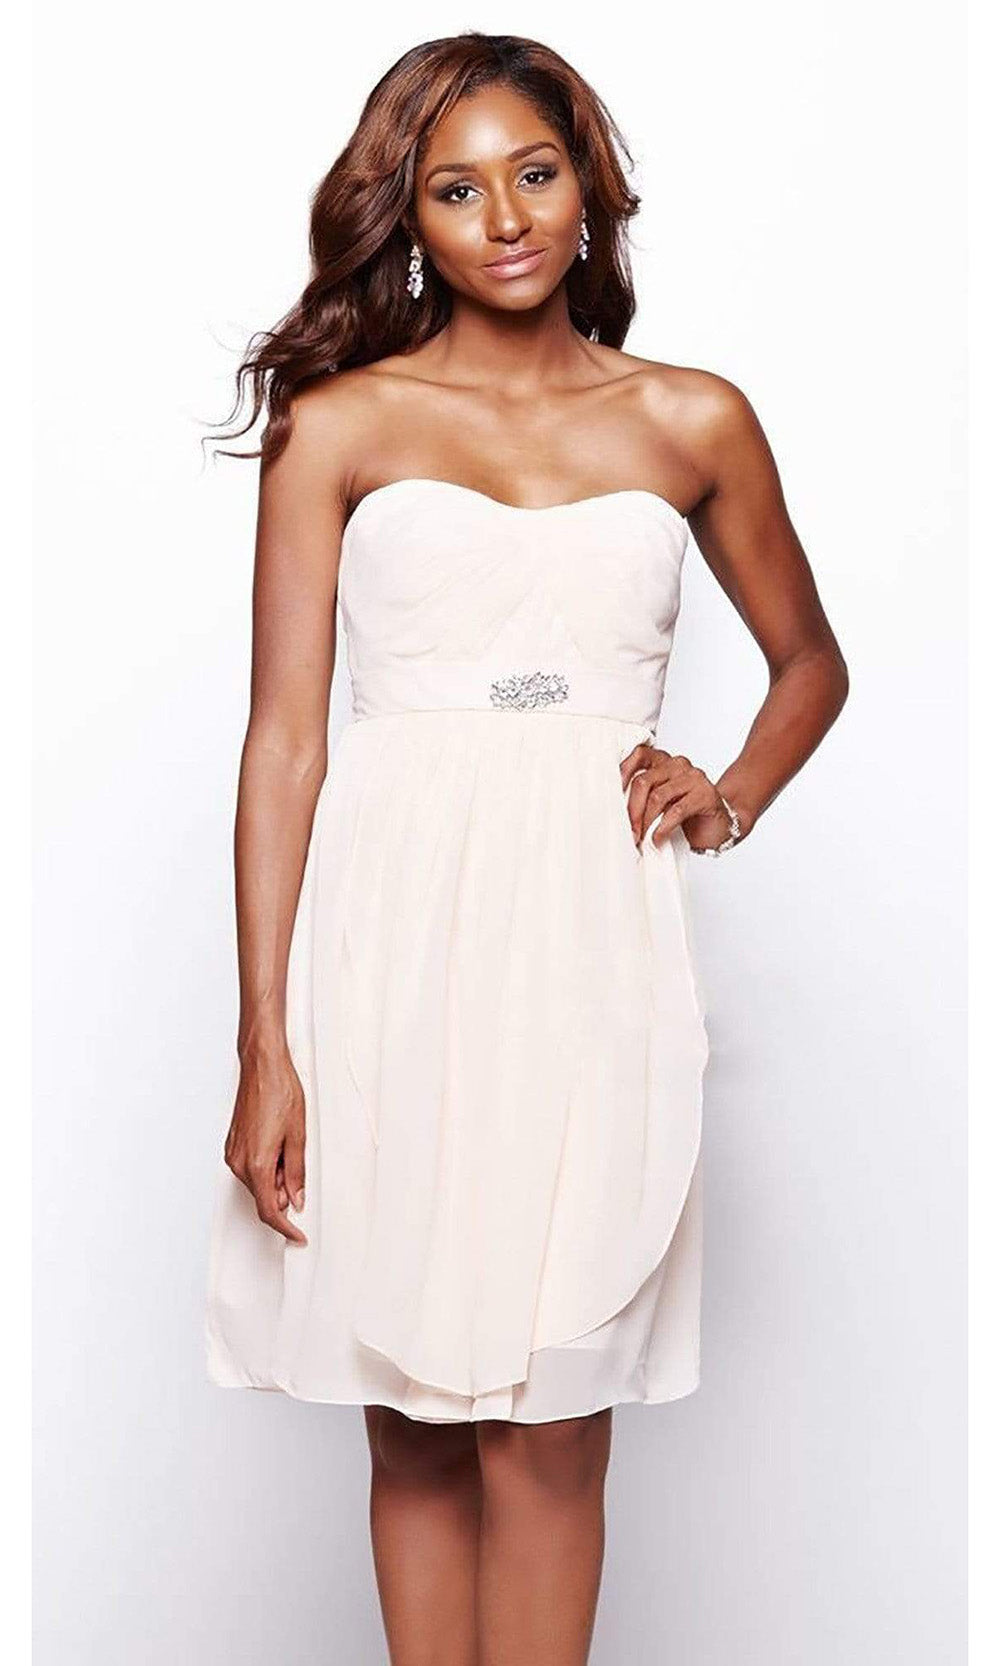 Milano Formals - E1573 Strapless Sweetheart Neckline Pleated Chiffon Cocktail Dress in White